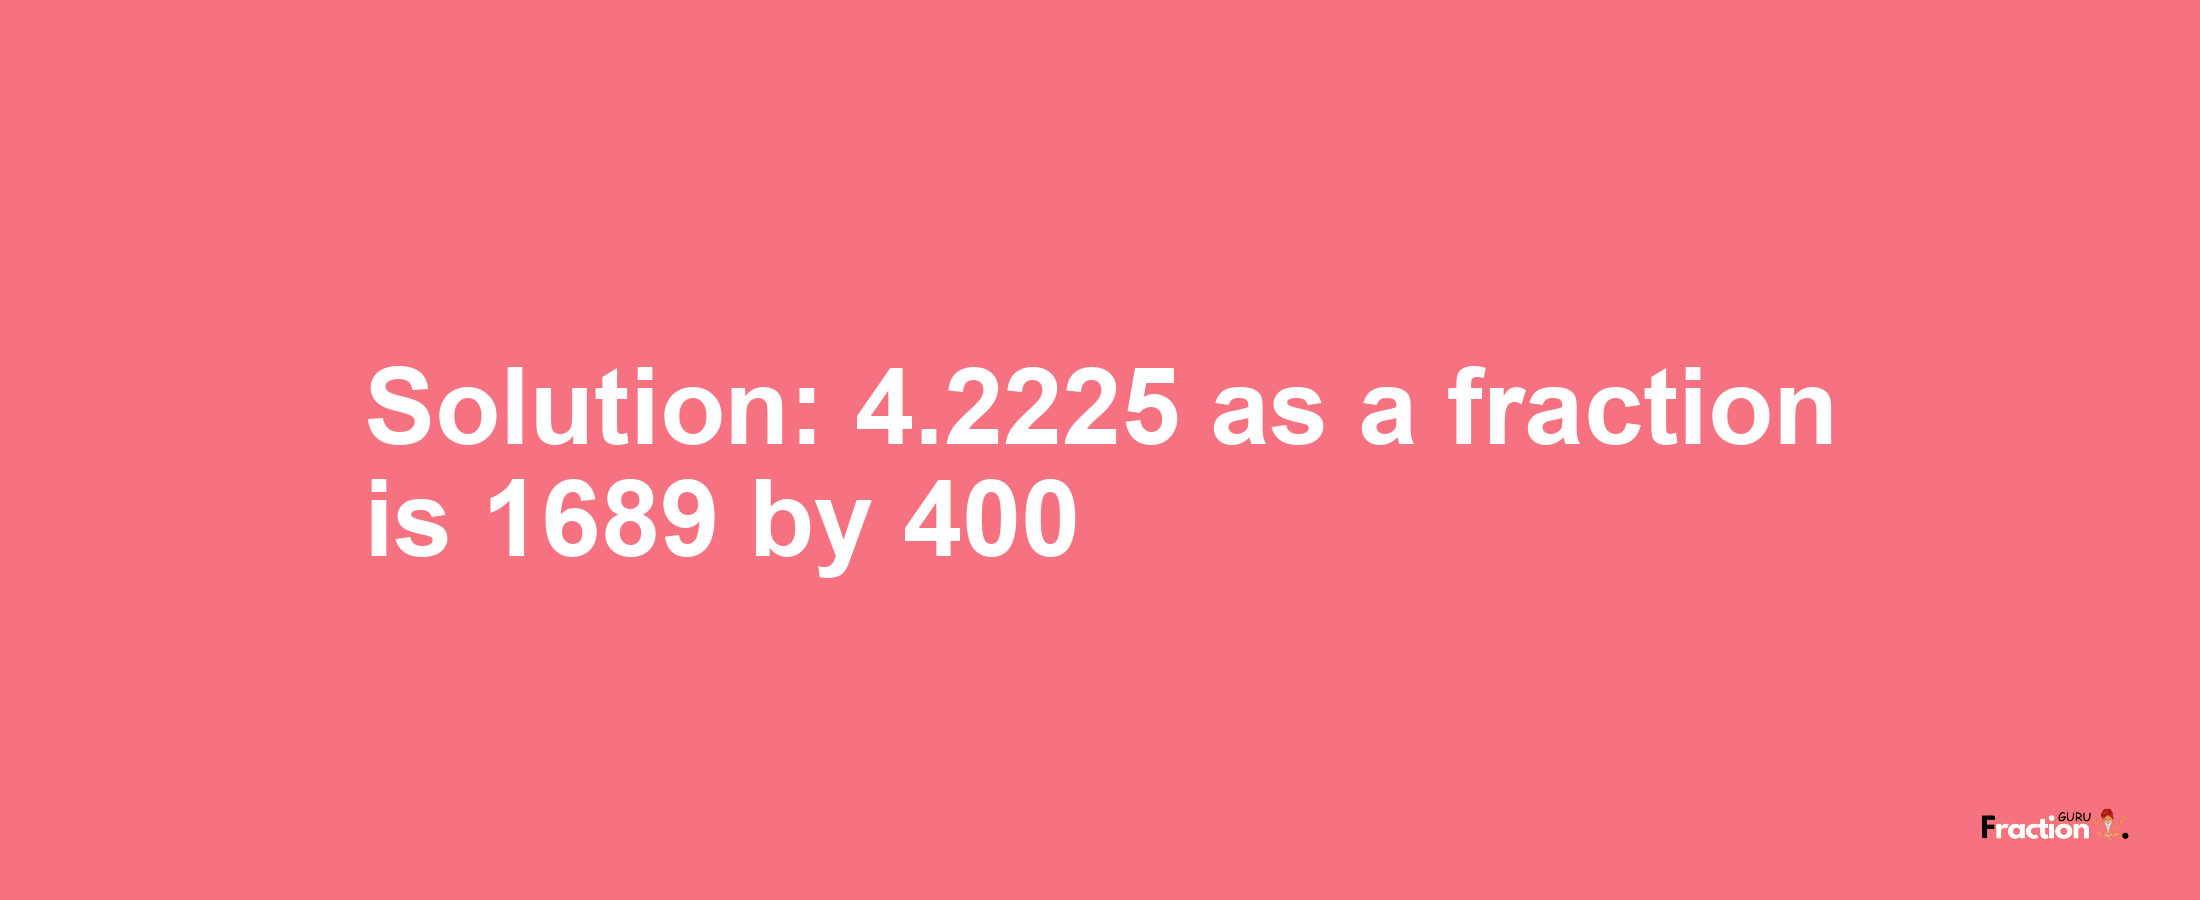 Solution:4.2225 as a fraction is 1689/400